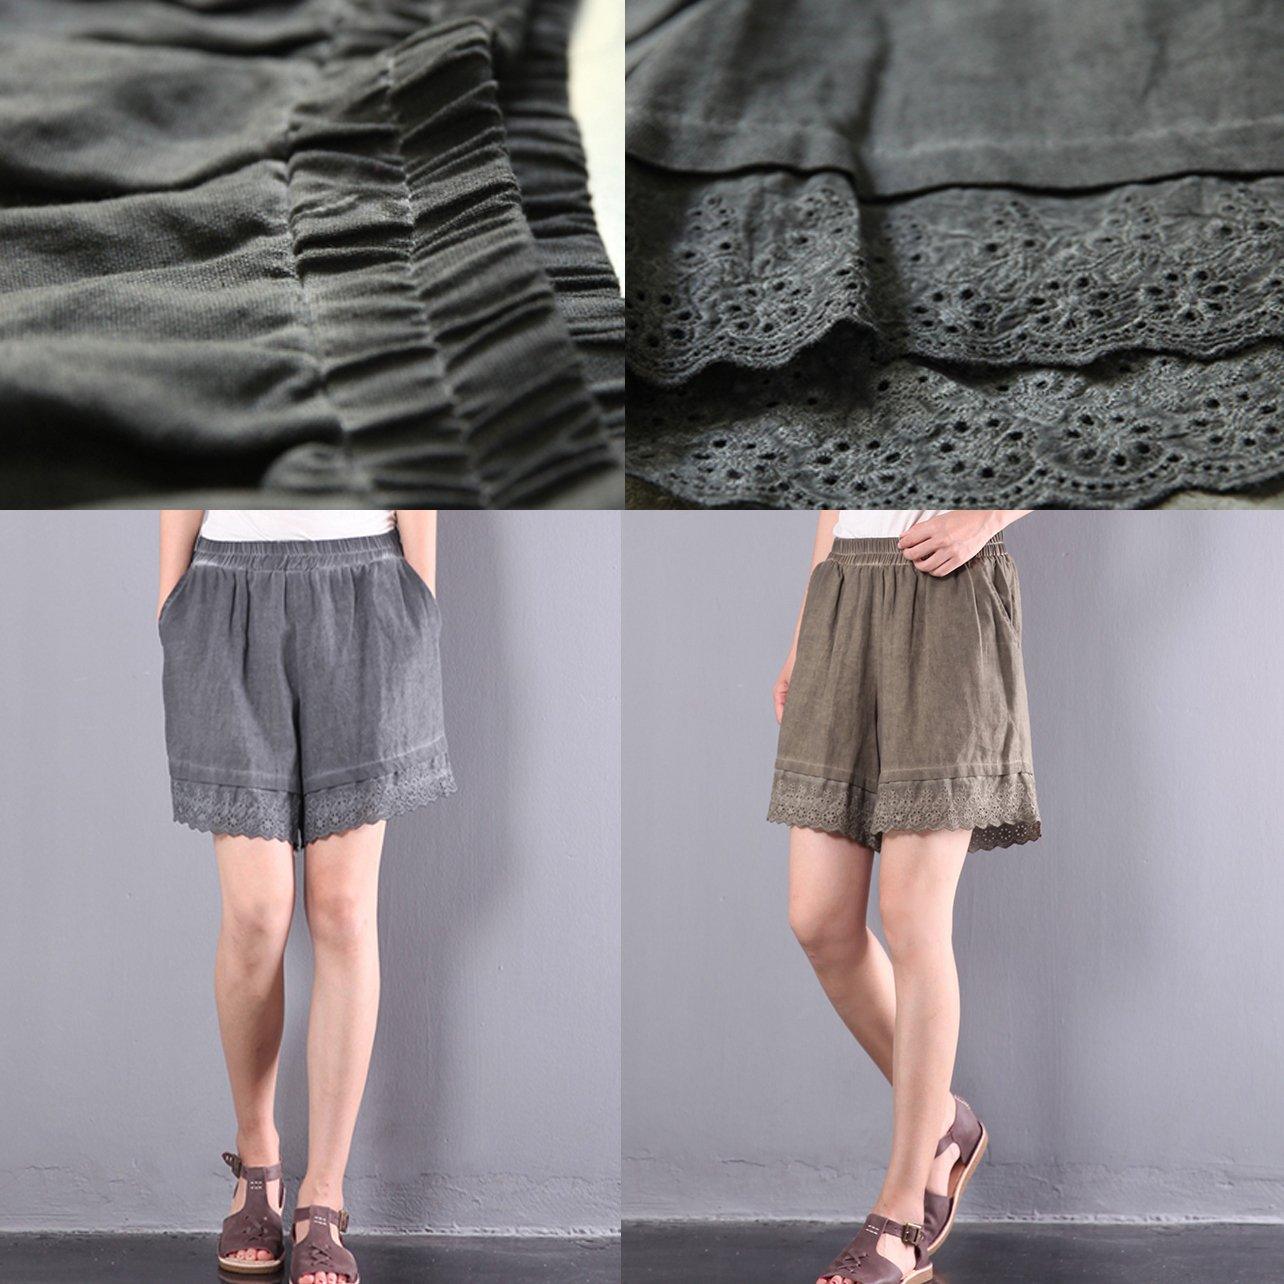 gray lace patchwork linen pants casual loose shorts - Omychic